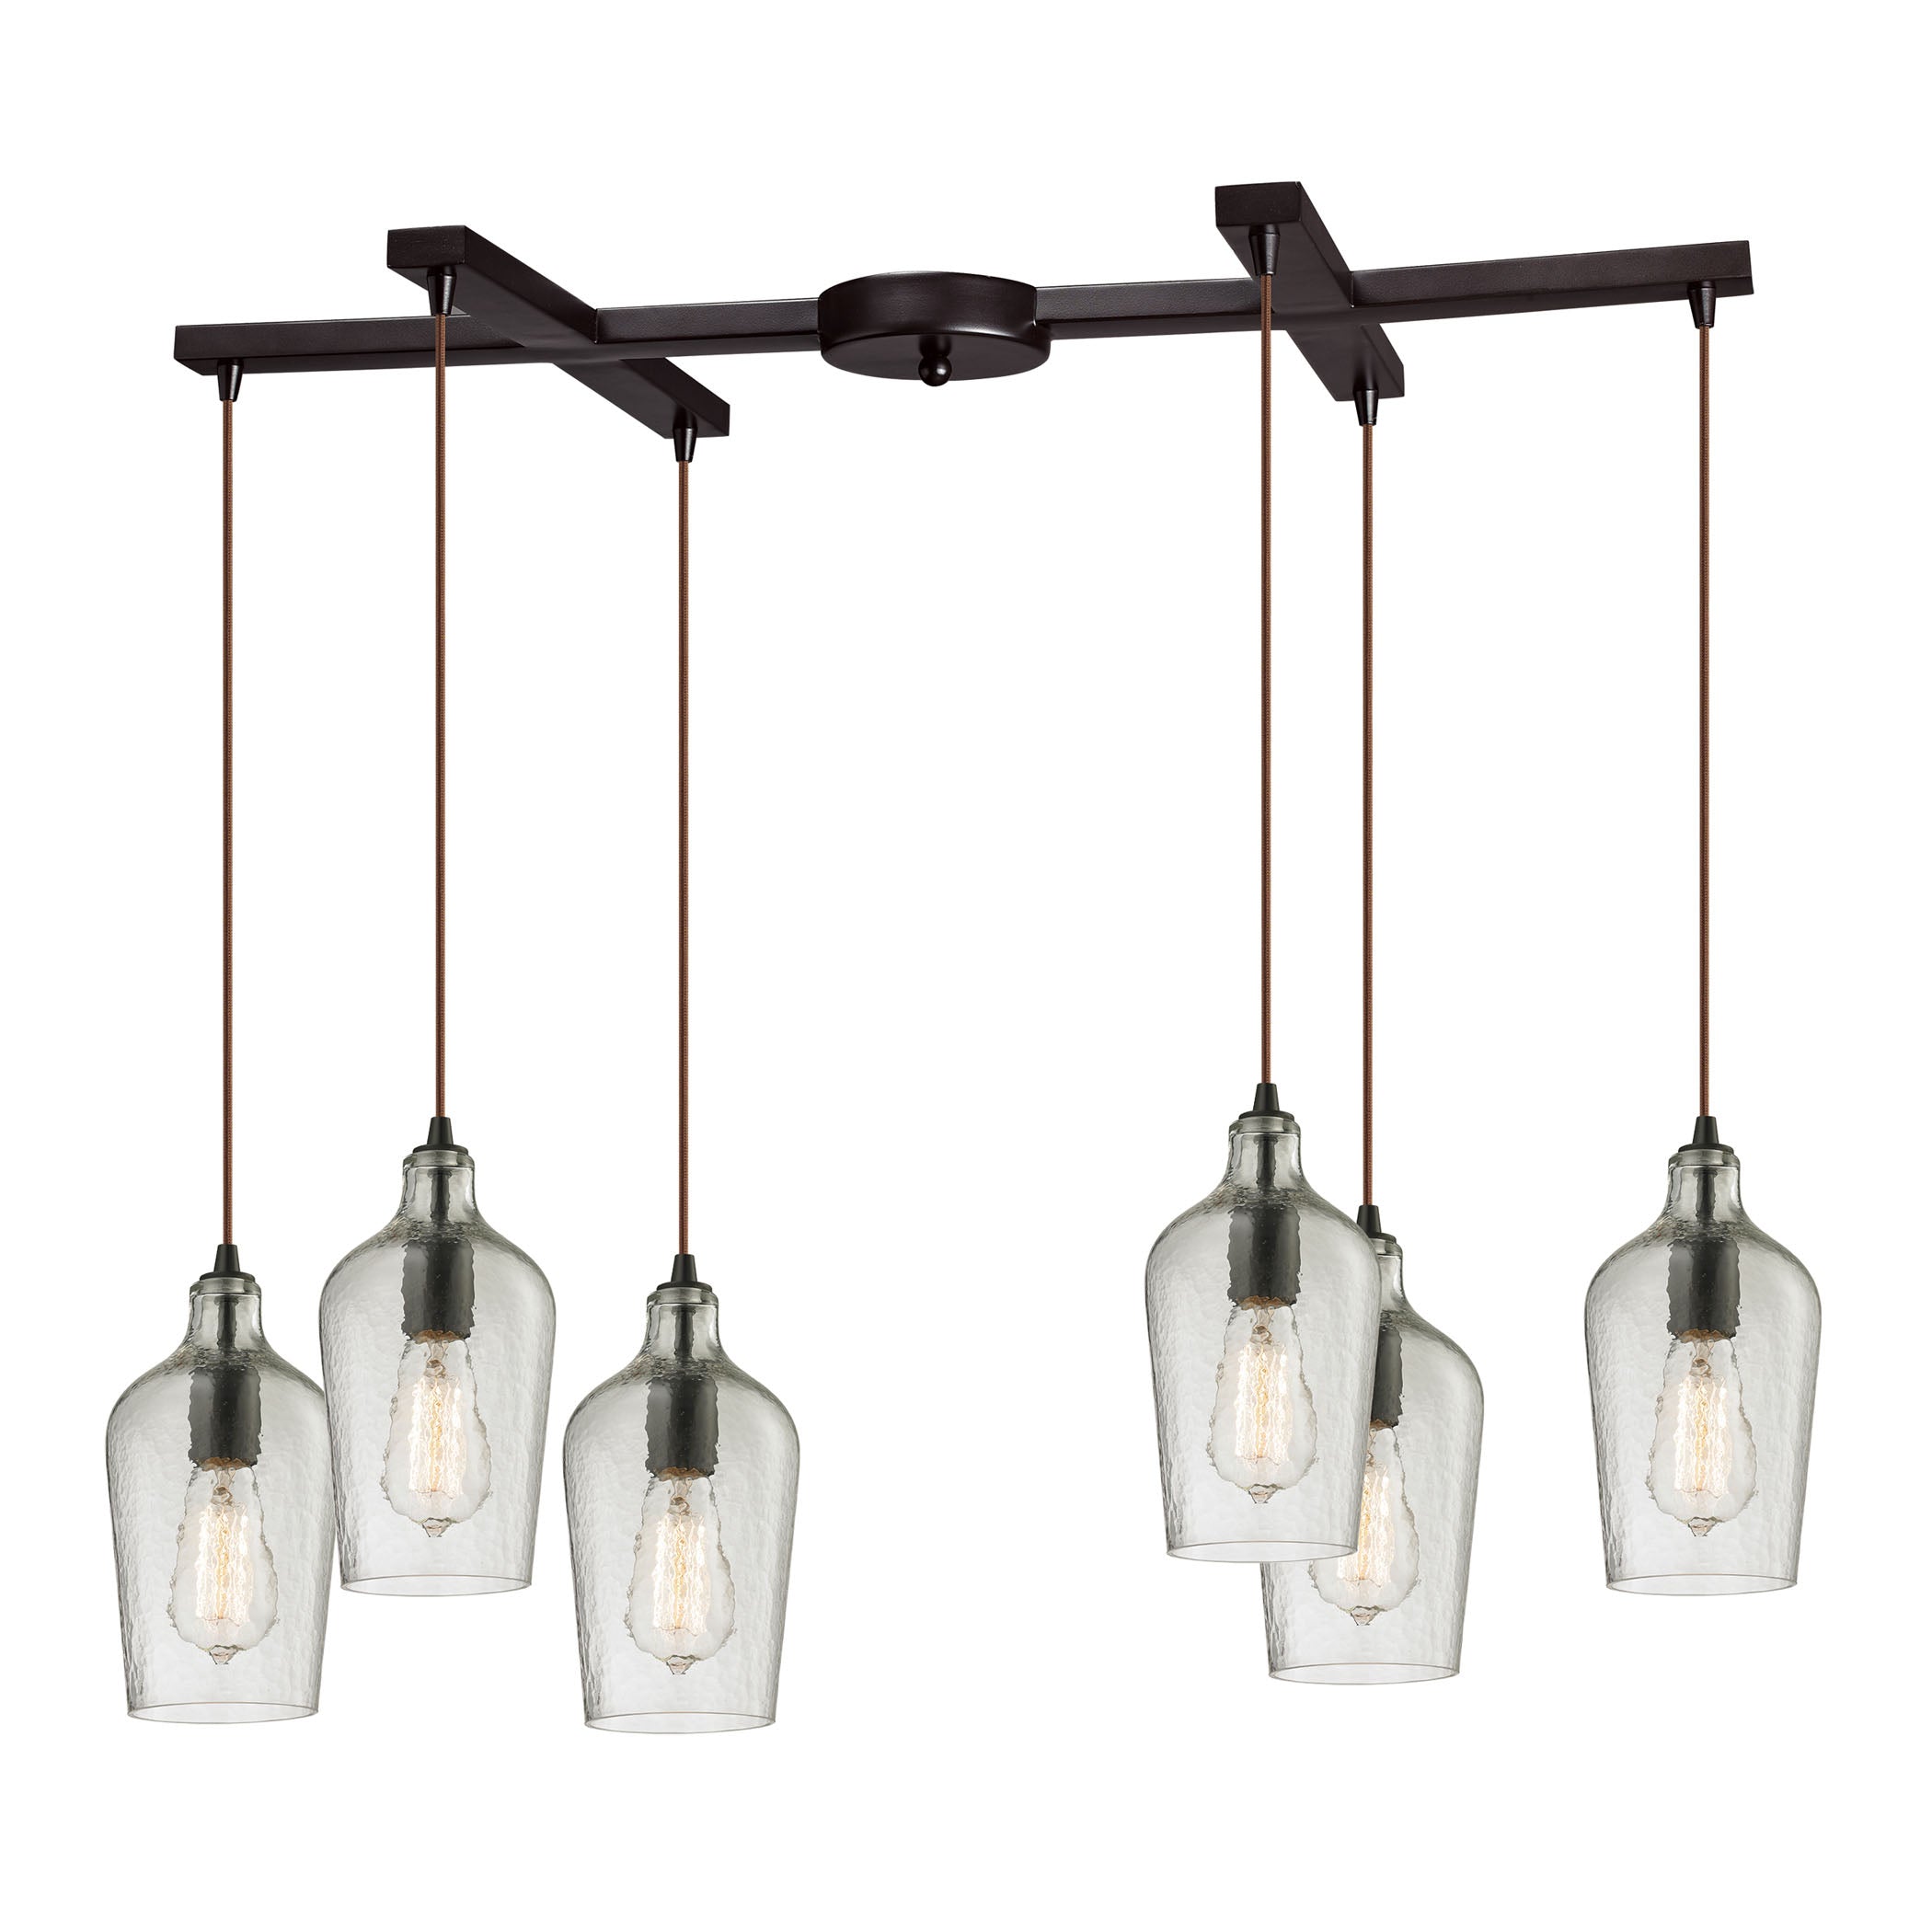 ELK Lighting 10331/6CLR Hammered Glass 6-Light H-Bar Pendant Fixture in Oiled Bronze with Hammered Clear Glass